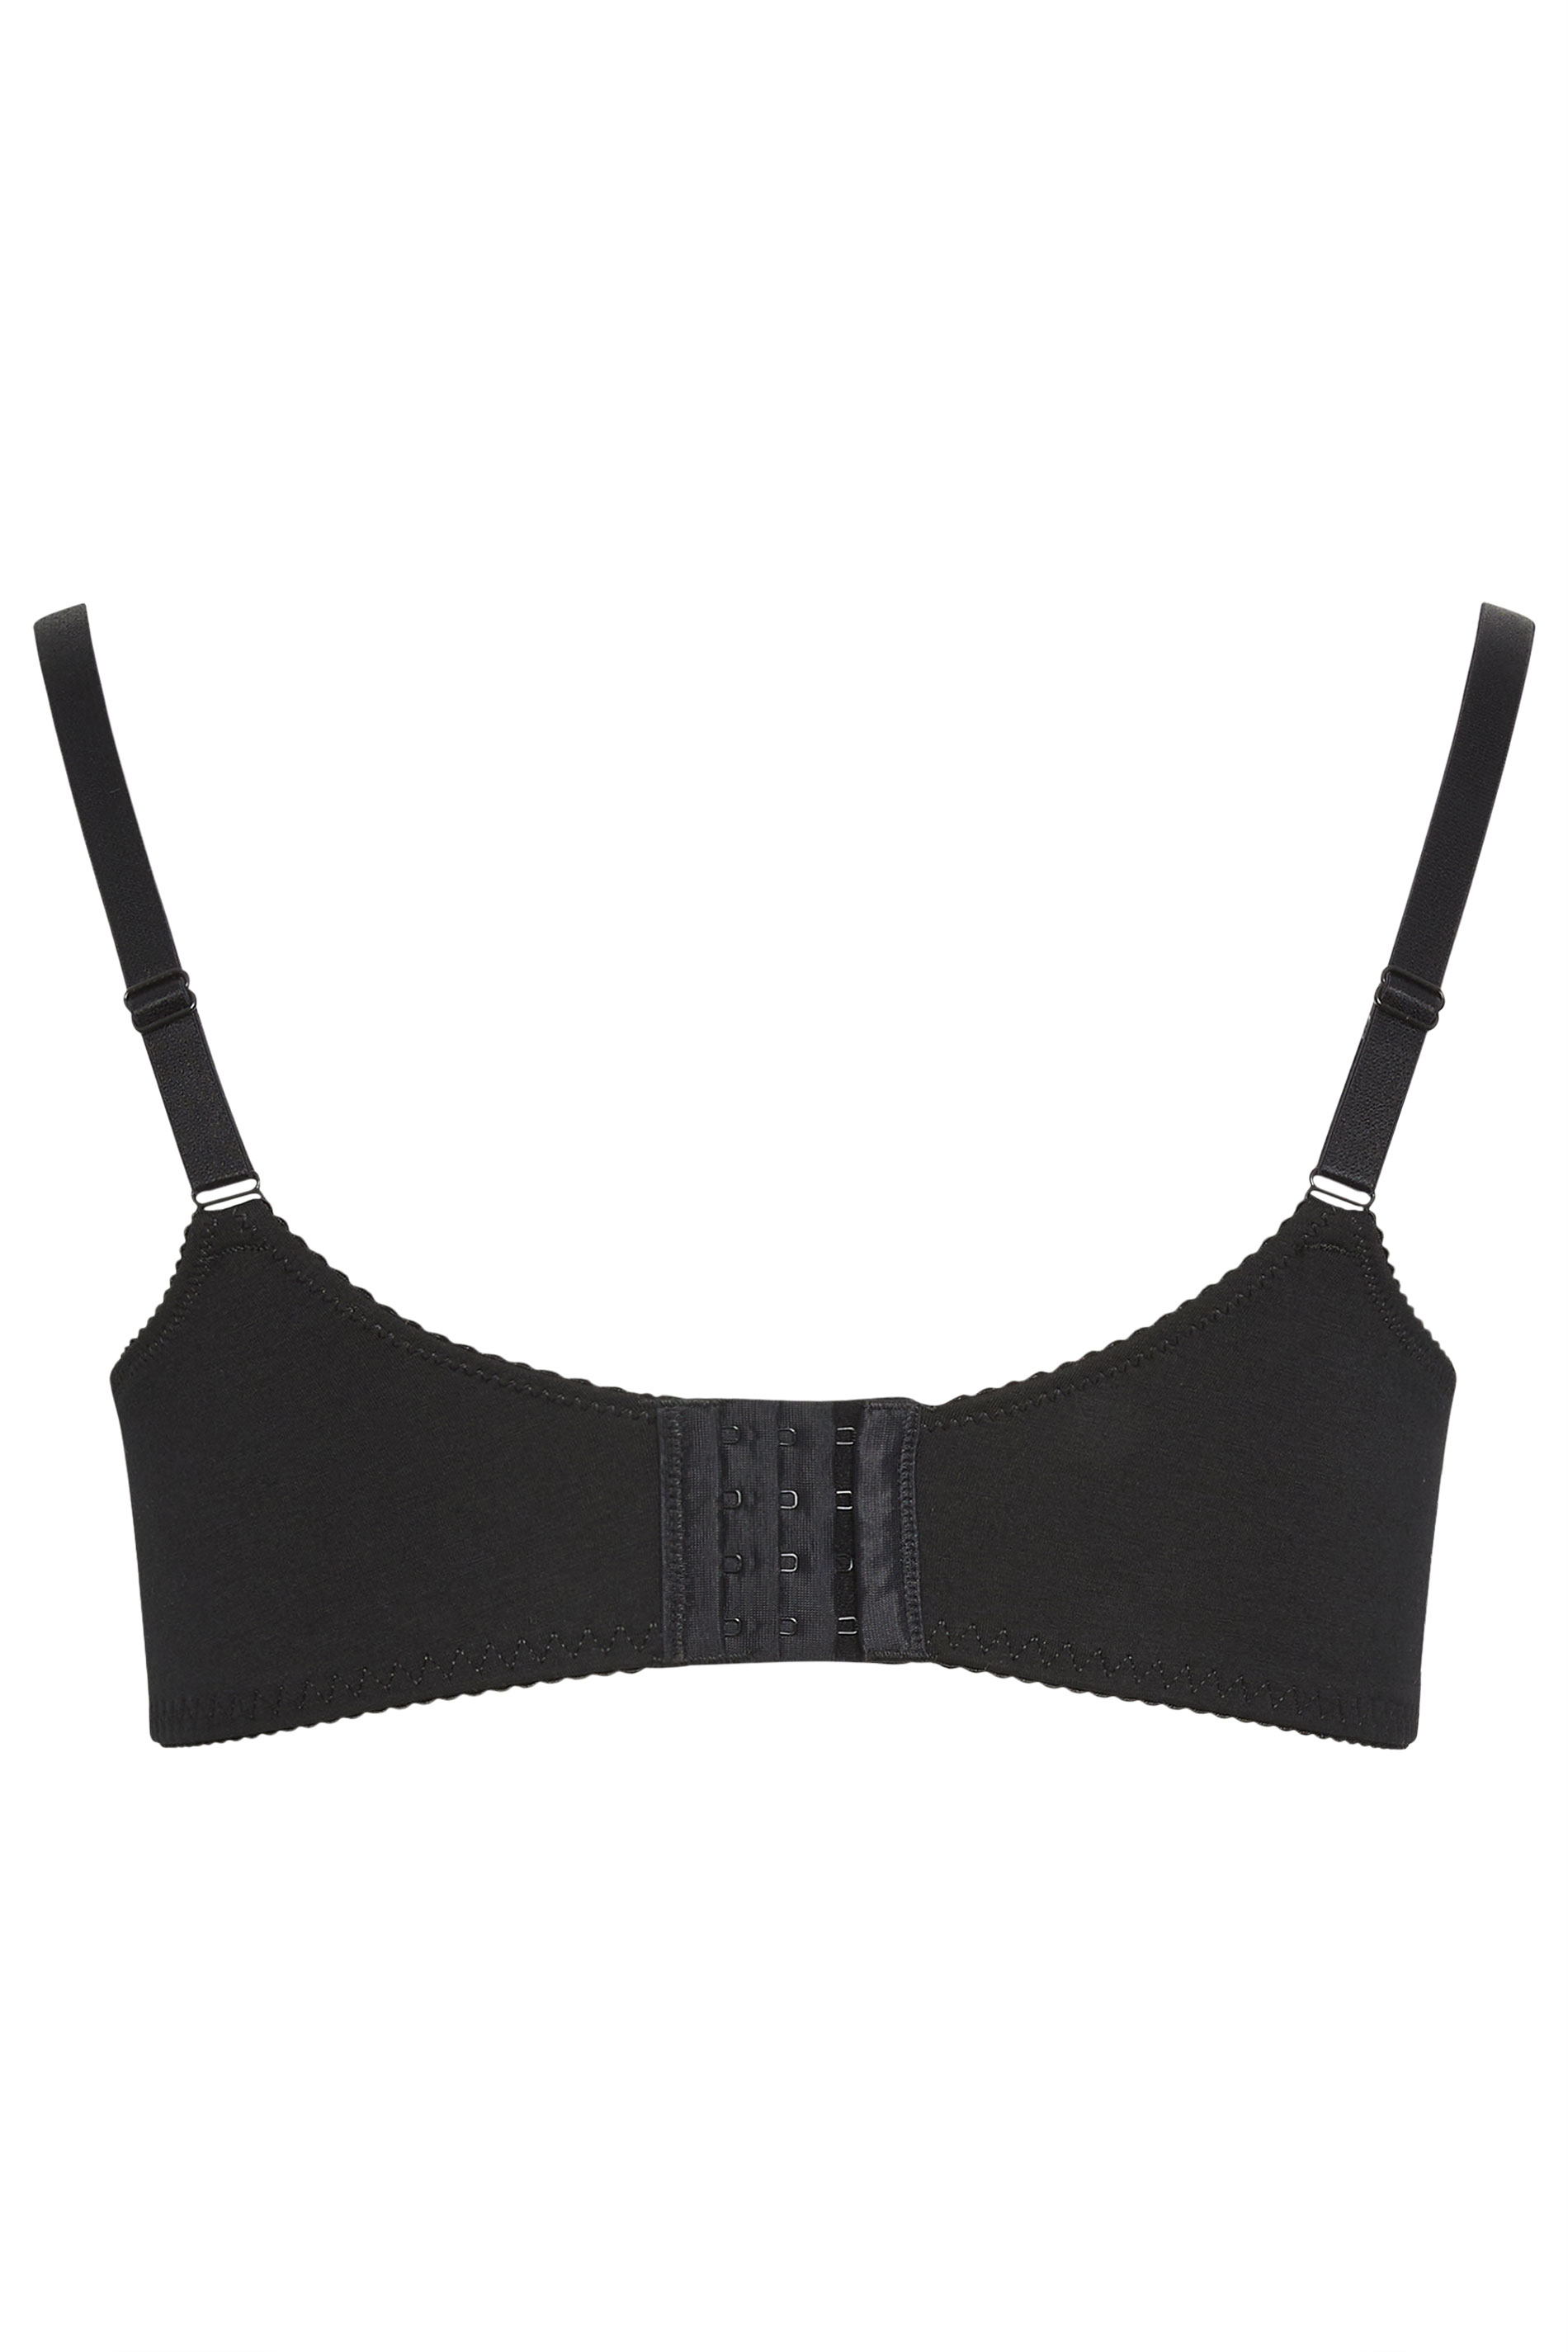 BLAKE & CO. Lace Bra, Sexy Bra, Lace Bras for Women, Non Padded Bra,  Everyday Bras and Comfortable Bra, Teen Bras, Lace Bras